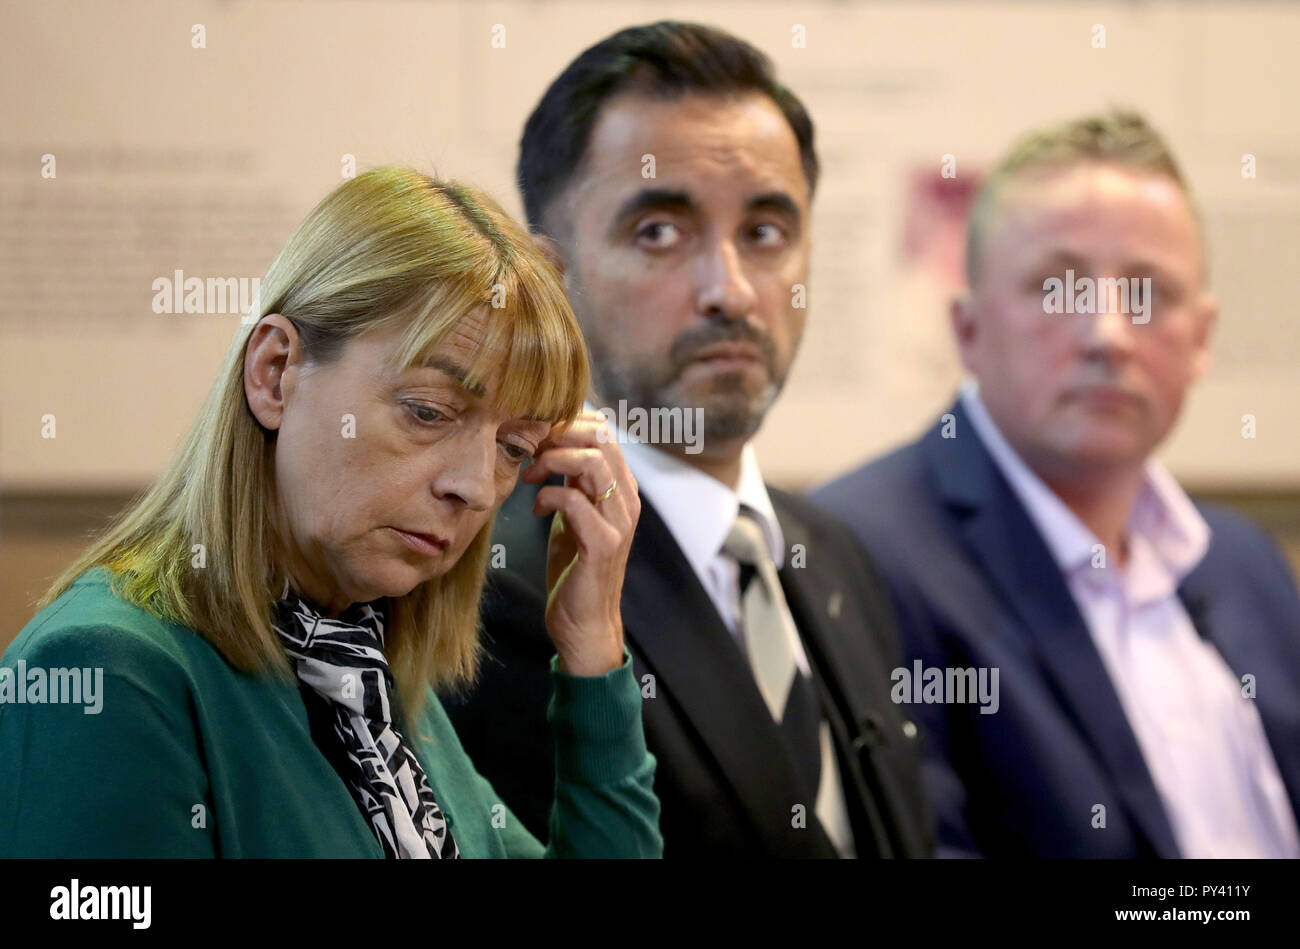 Stuart and Linda Allan, parents of Katie Allan, with lawyer Aamer Anwar (centre) during a press conference at Glasgow University to launch a campaign to reform the way the justice system deals with mental health. Stock Photo